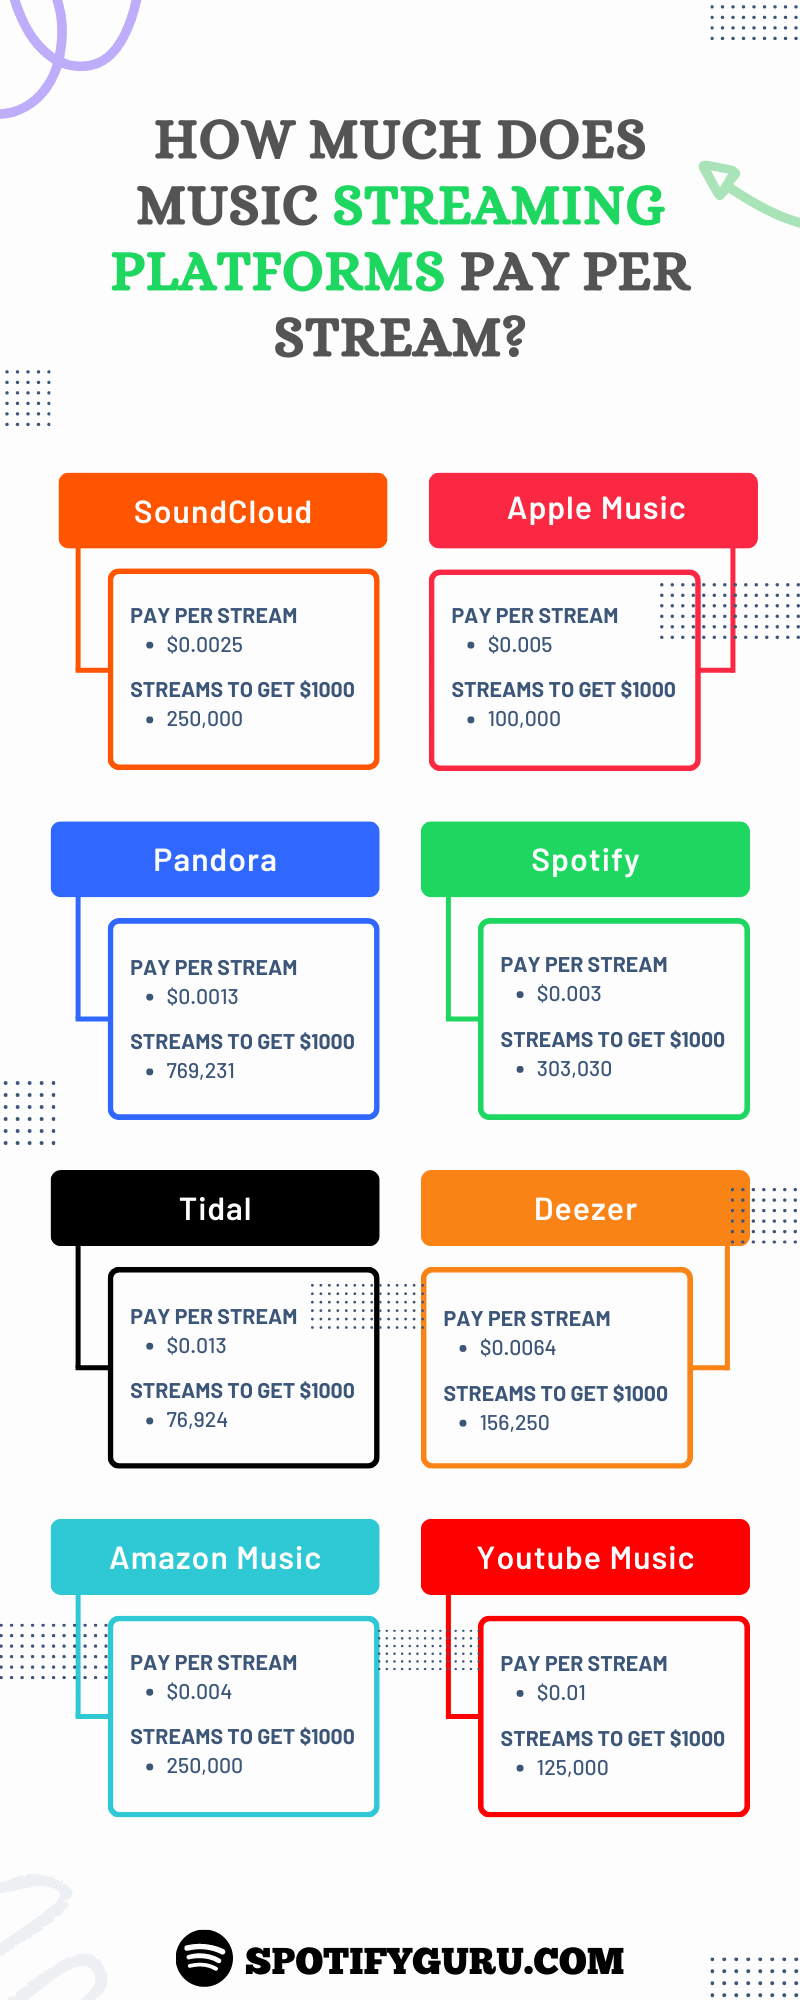 How Much Does Music Streaming Platforms Pay per Stream